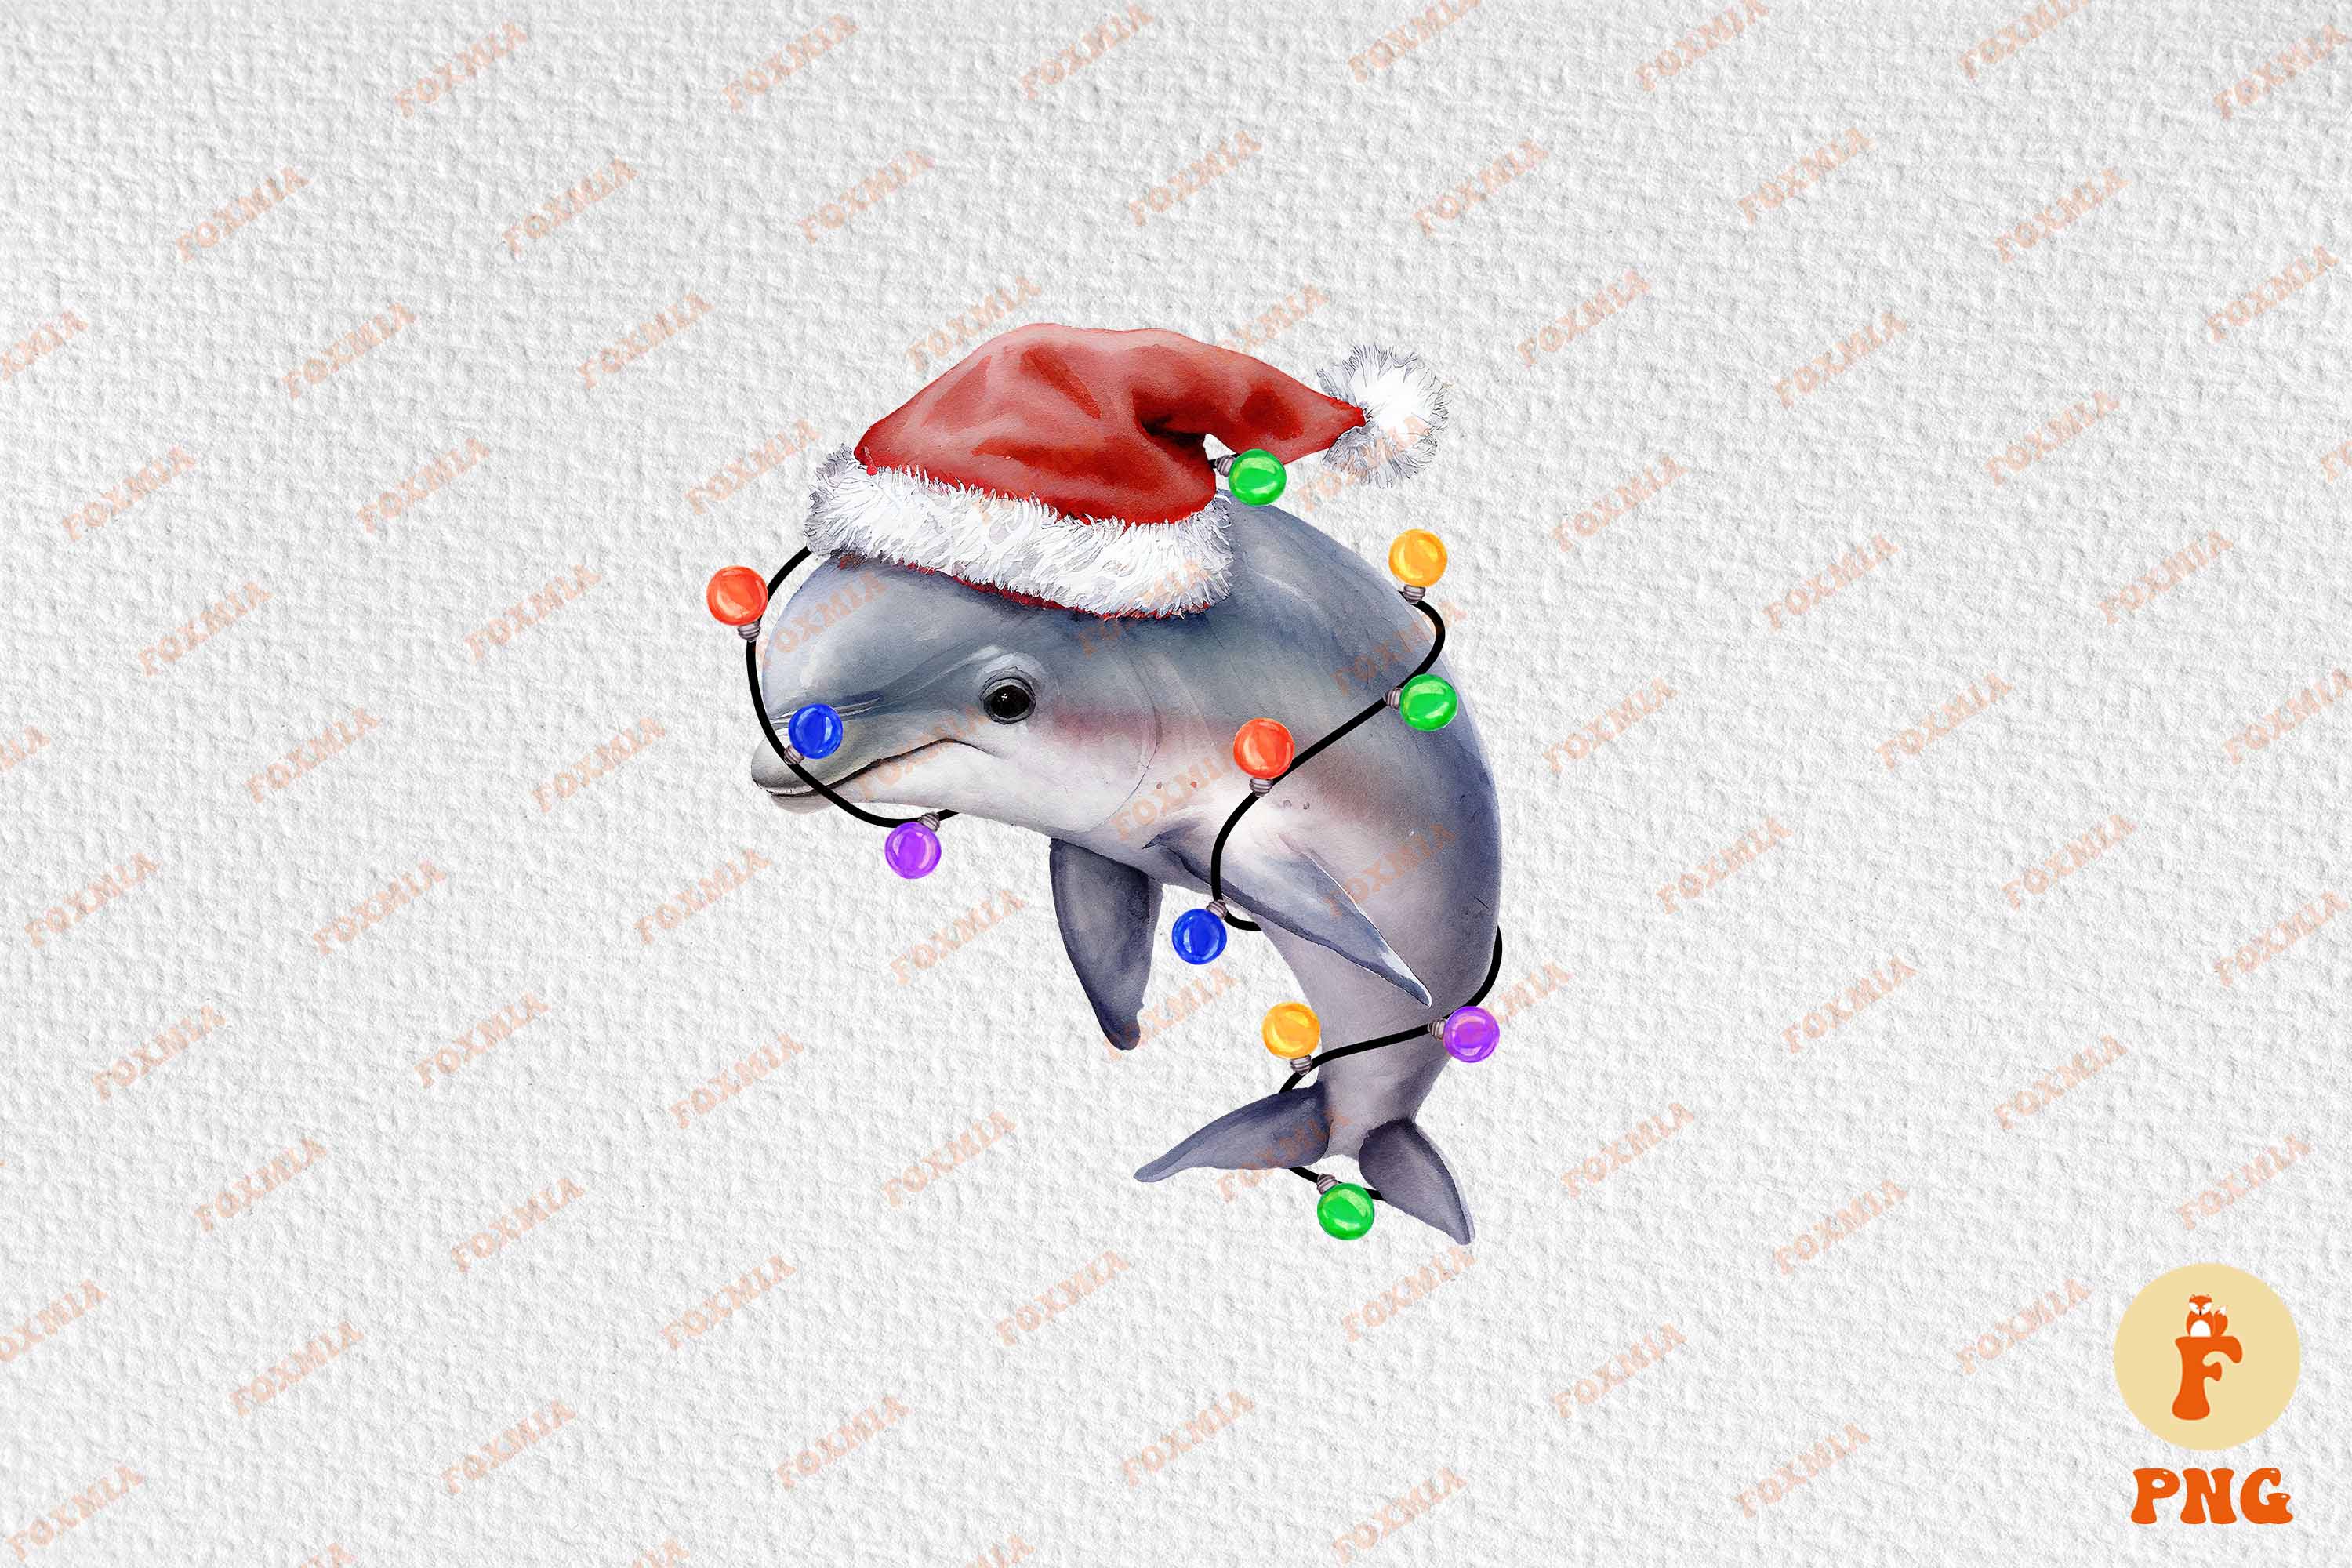 Adorable image of a dolphin wearing a santa hat.